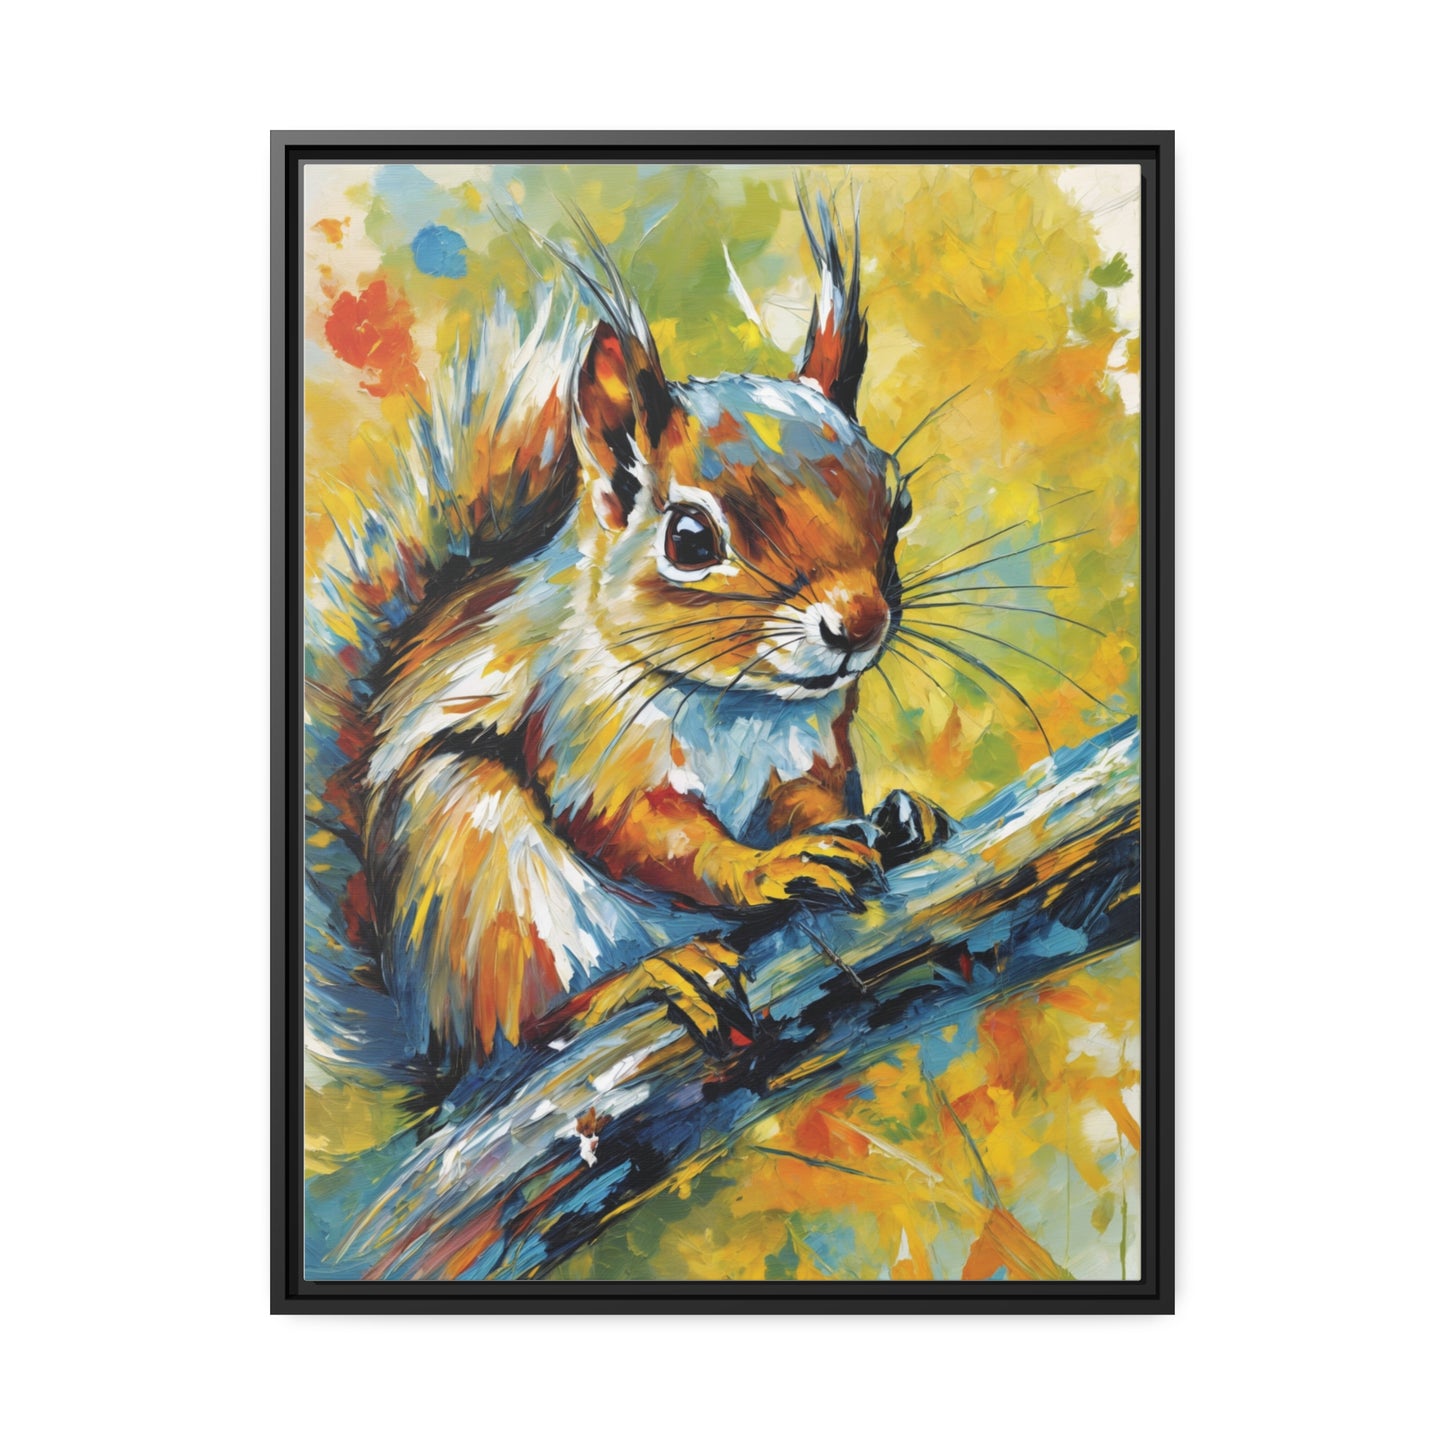 Radiant Squirrel in Motion Canvas Print, Wall Art Canvas, Home Decor, Colorful Squirrel Art, Woodland Creature Art